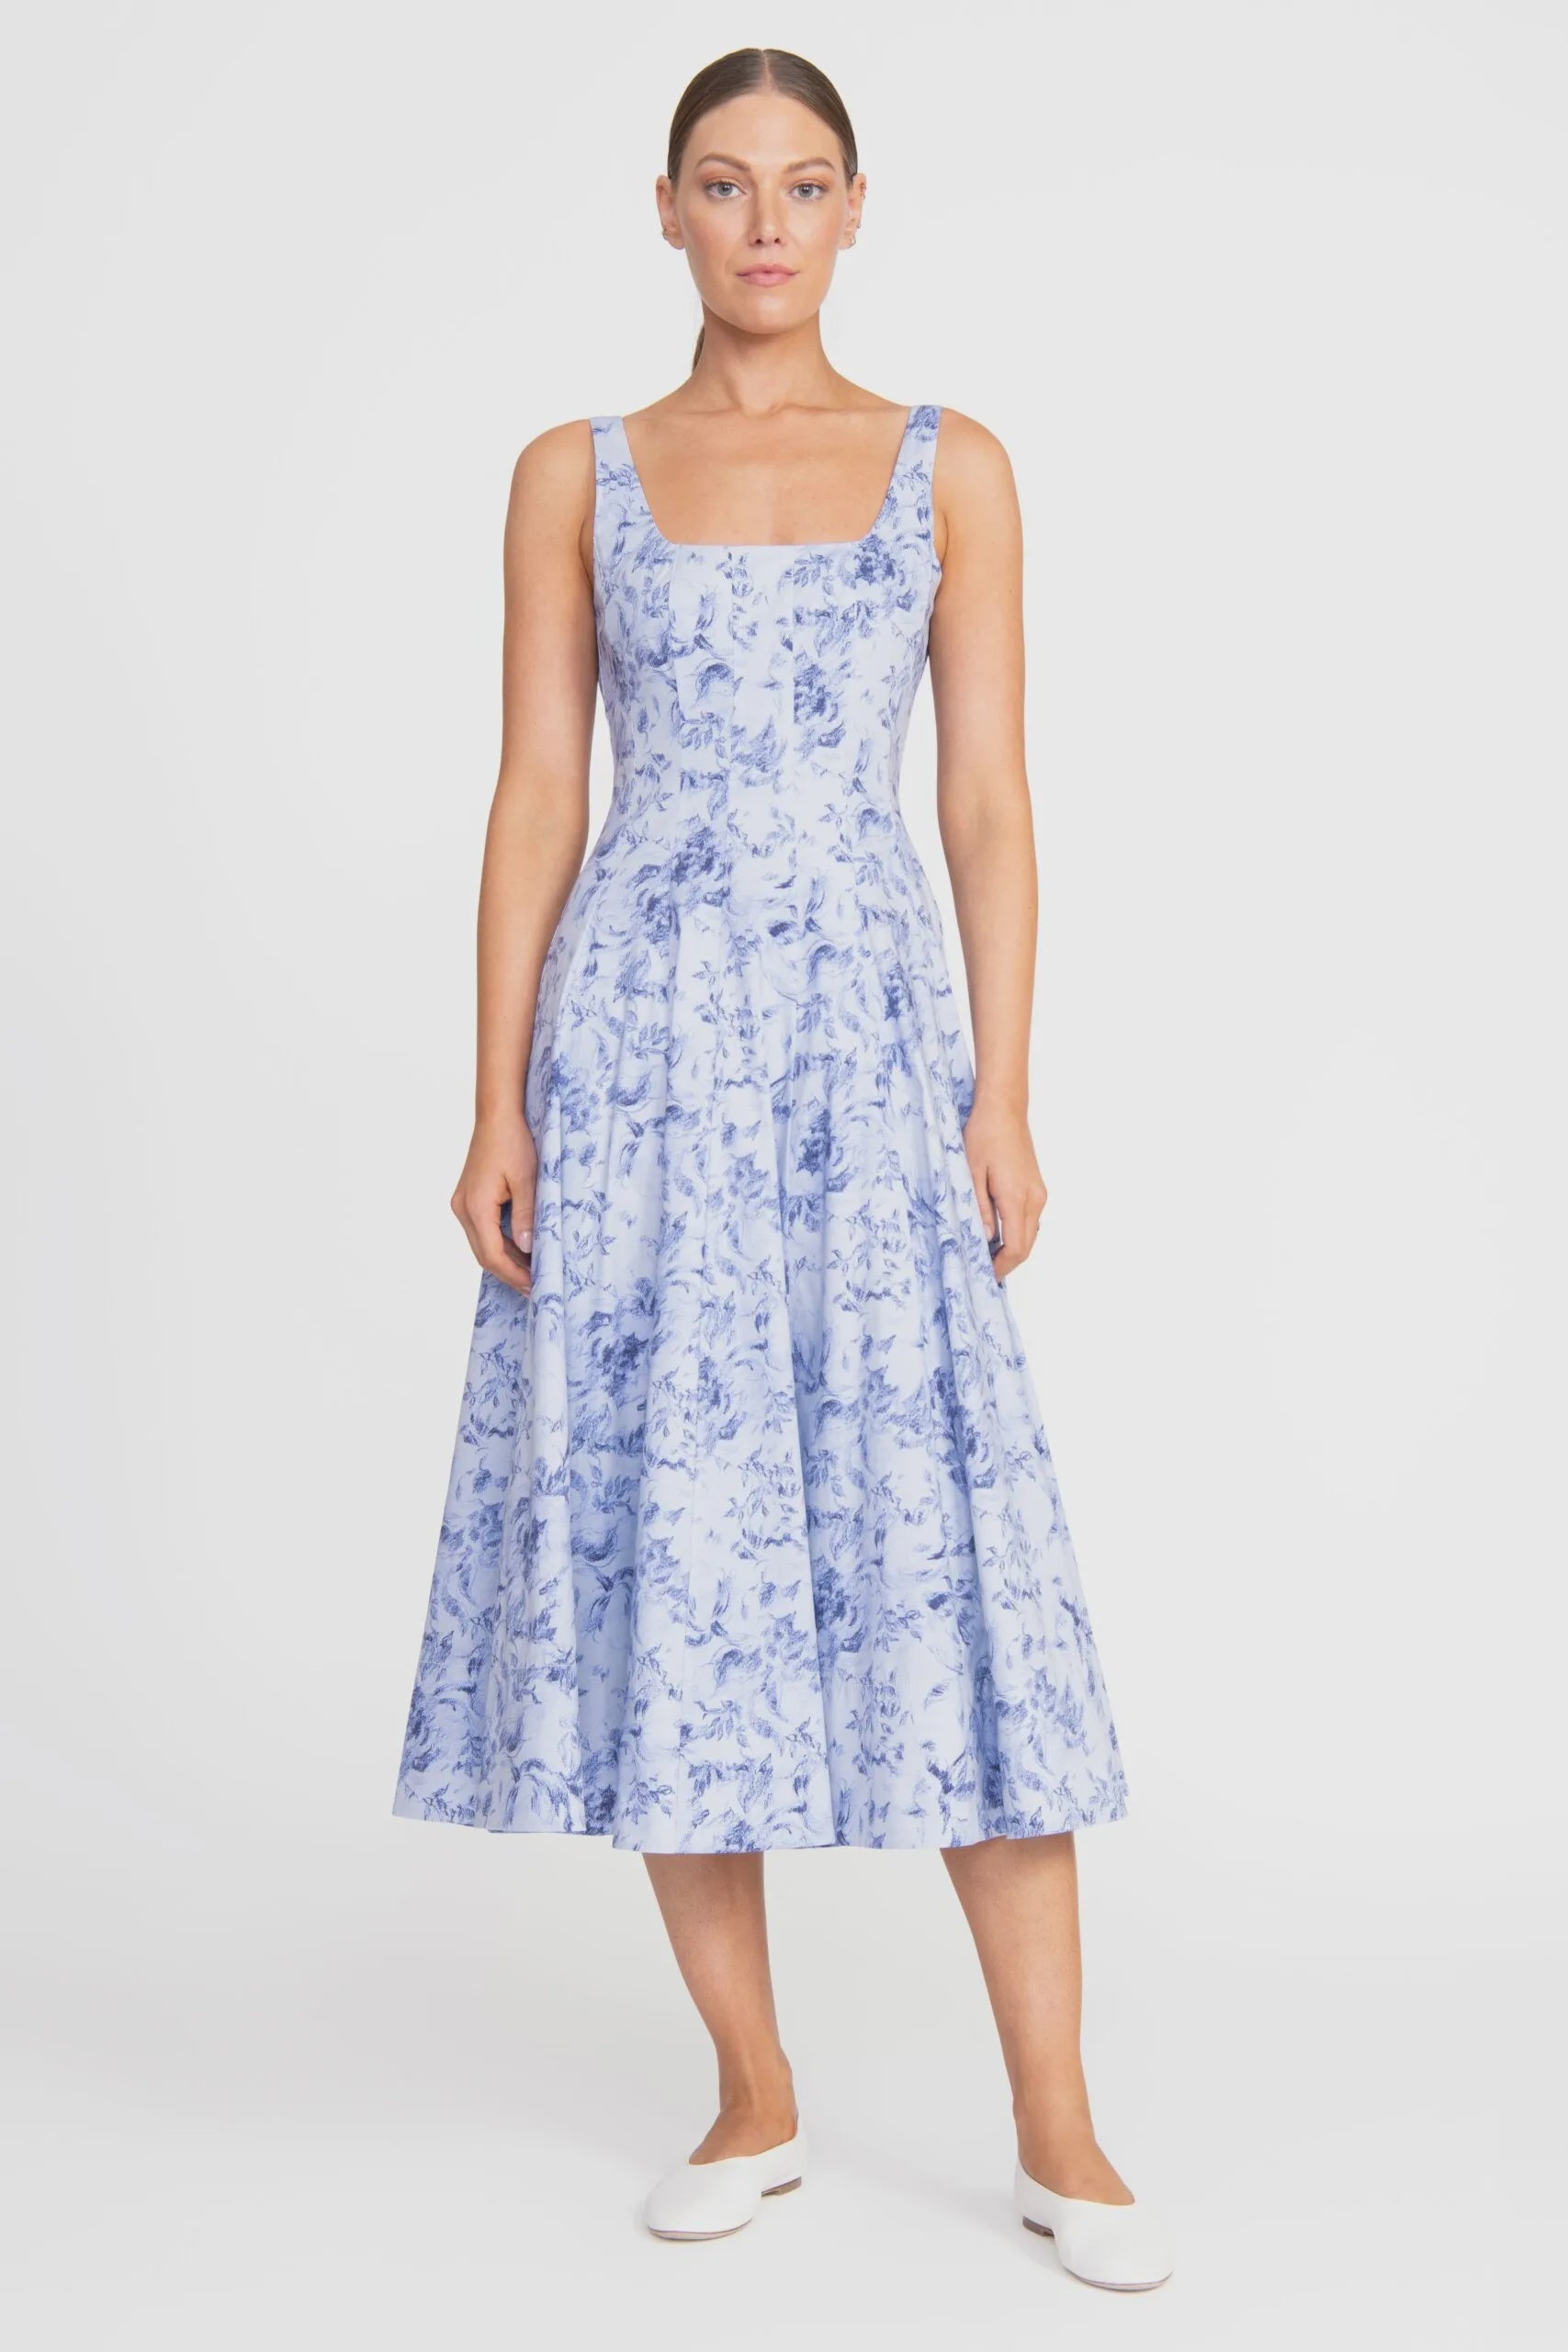 Wells Dress - Periwinkle Floral